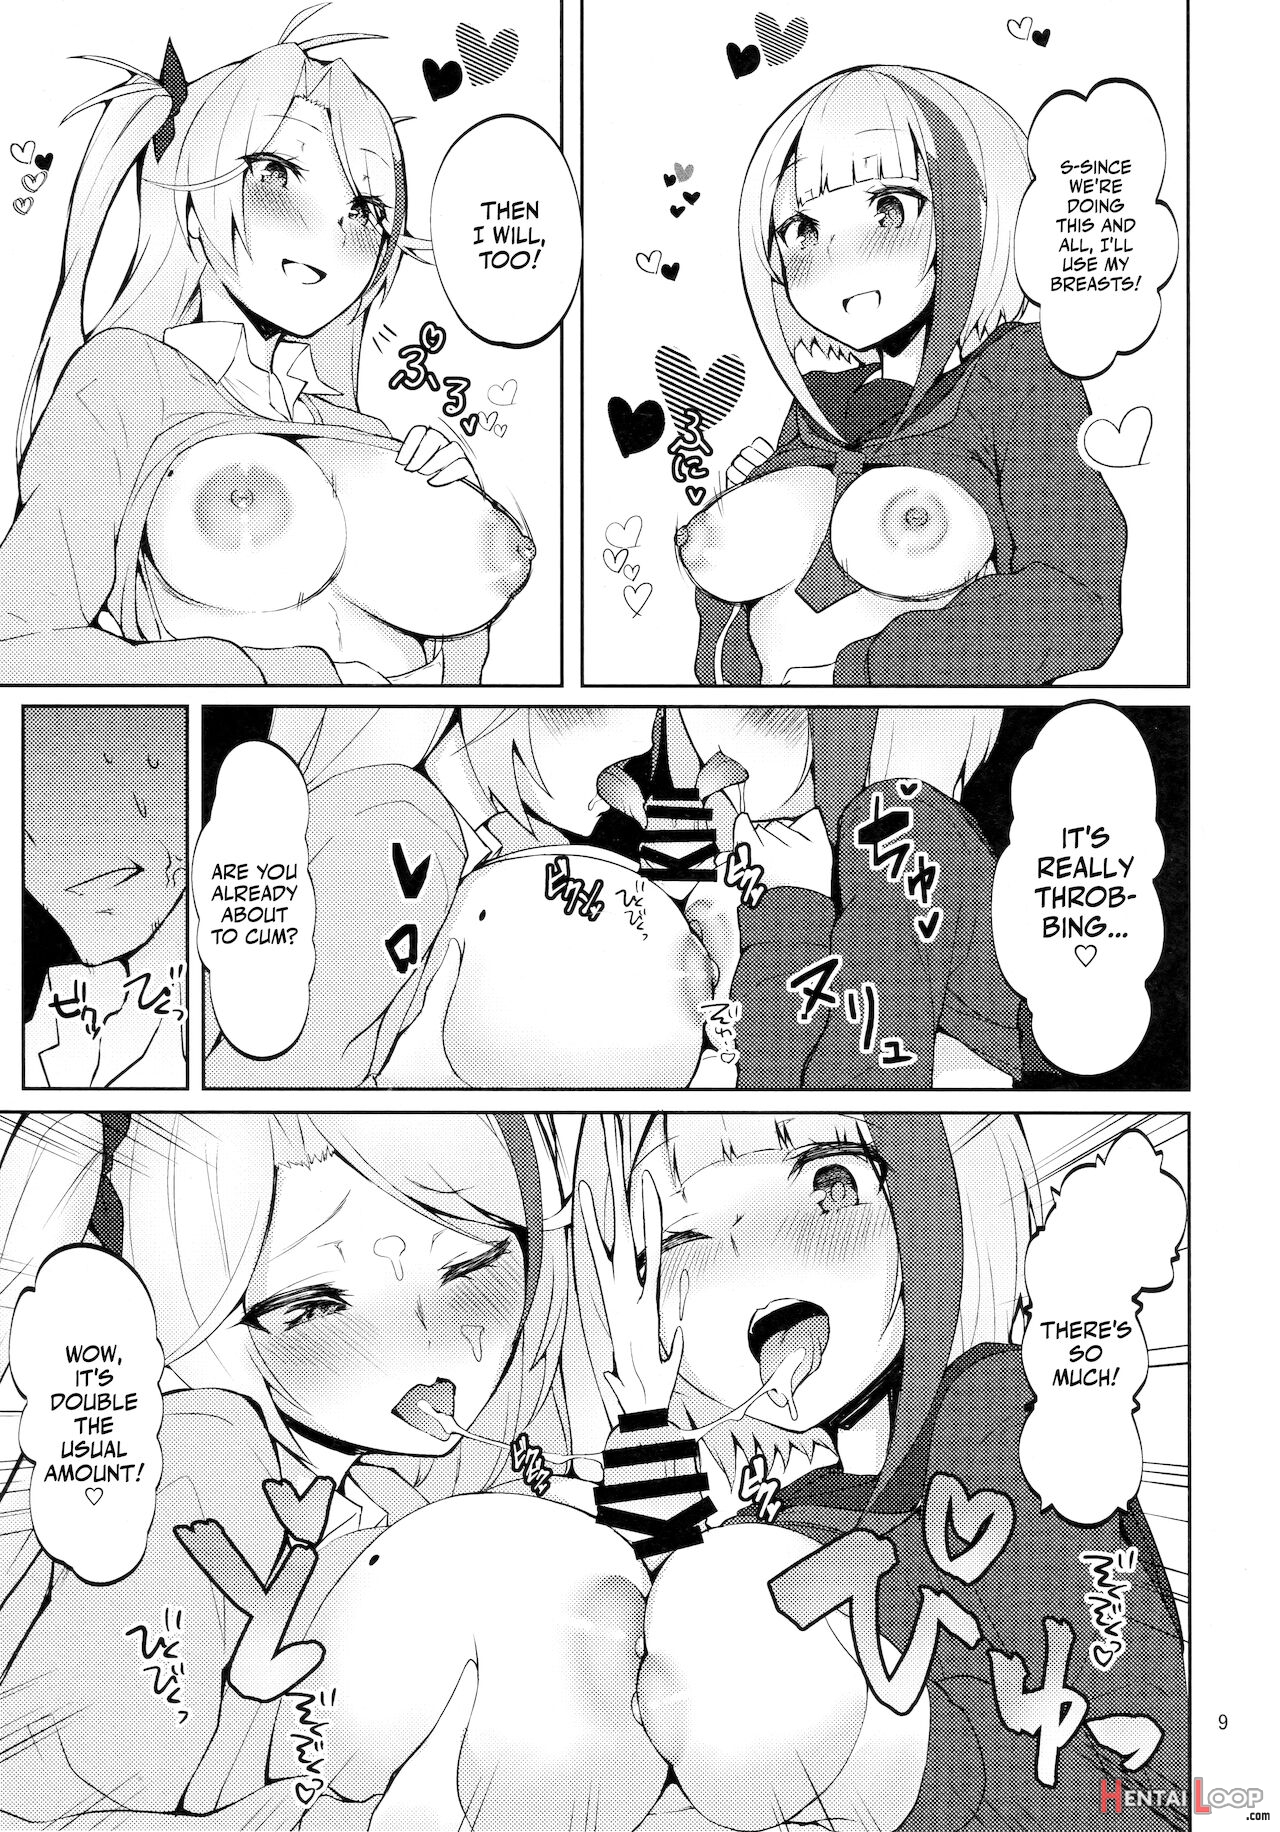 Does The Younger Sister Shipgirl Like Doing It In School Uniforms? page 7